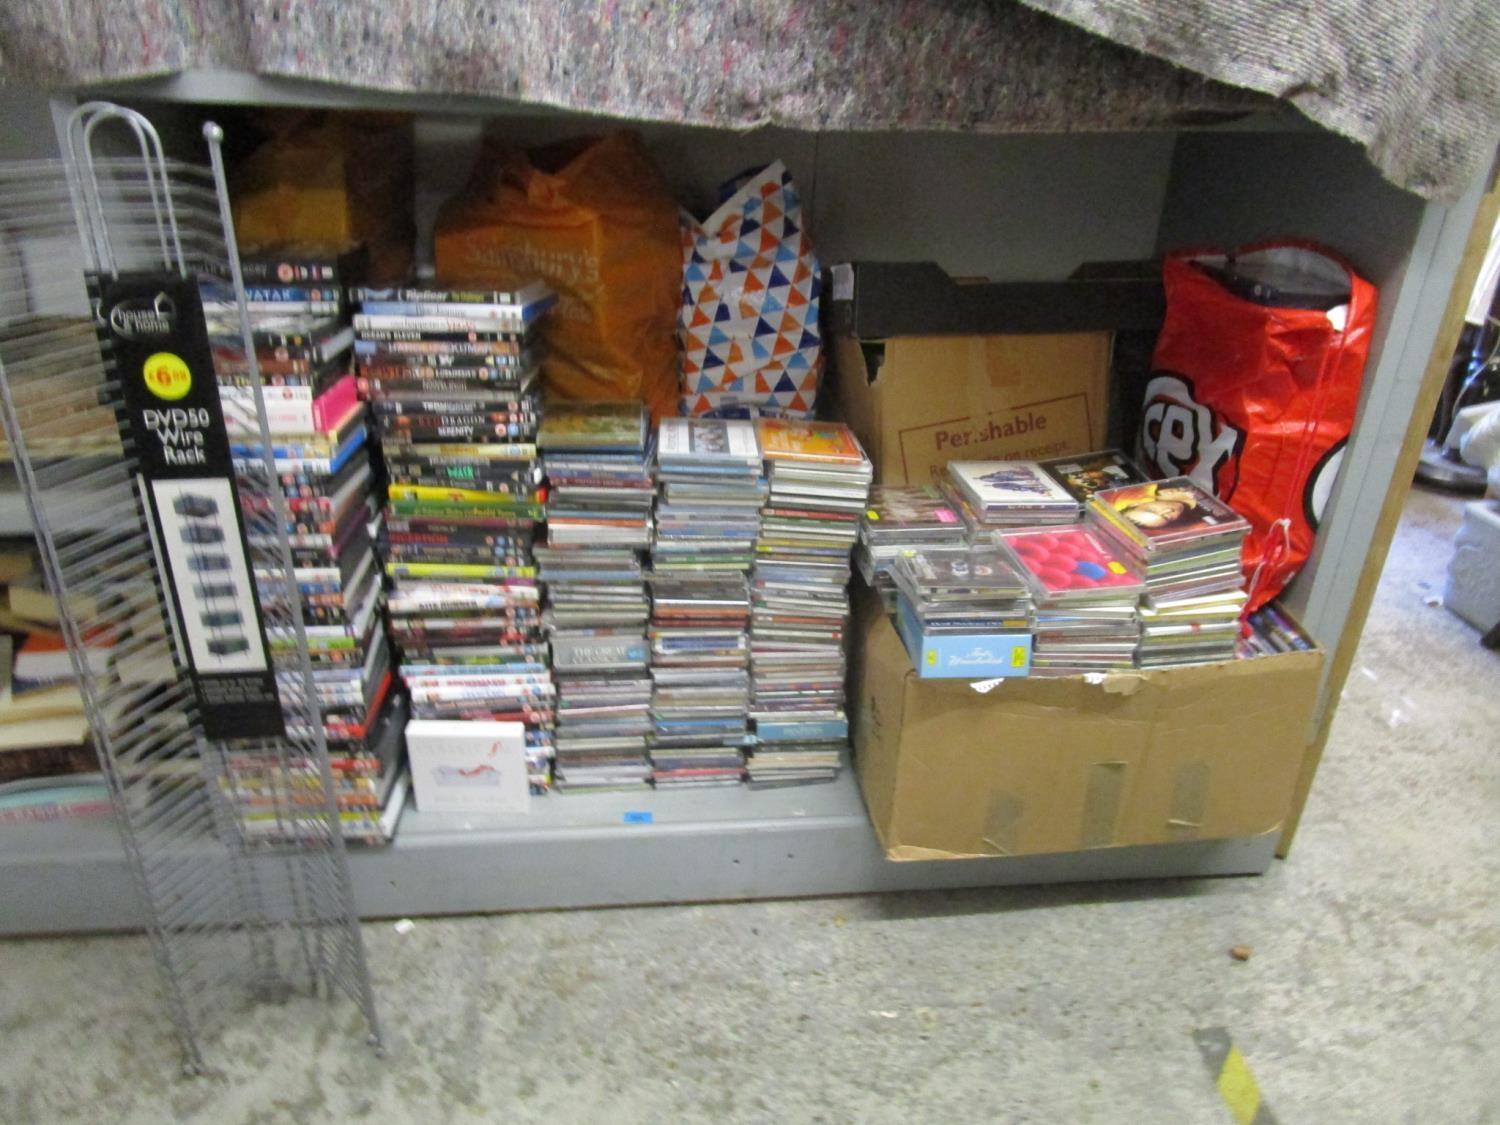 1300 DVDs, CDs, cassettes and two CD stands